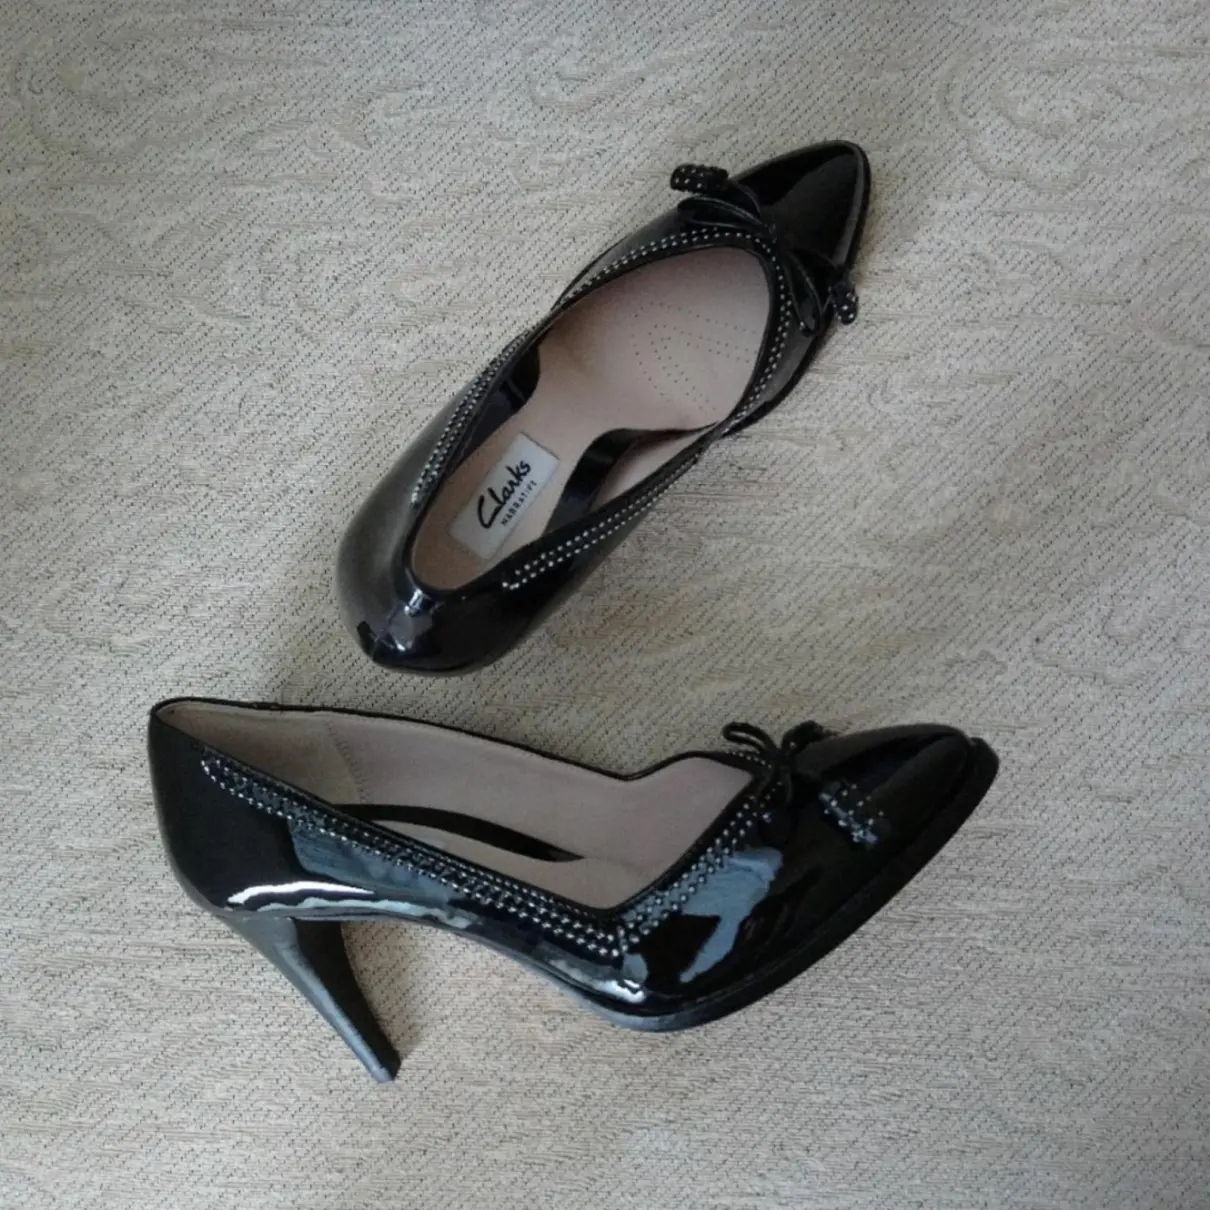 Patent leather heels Clarks